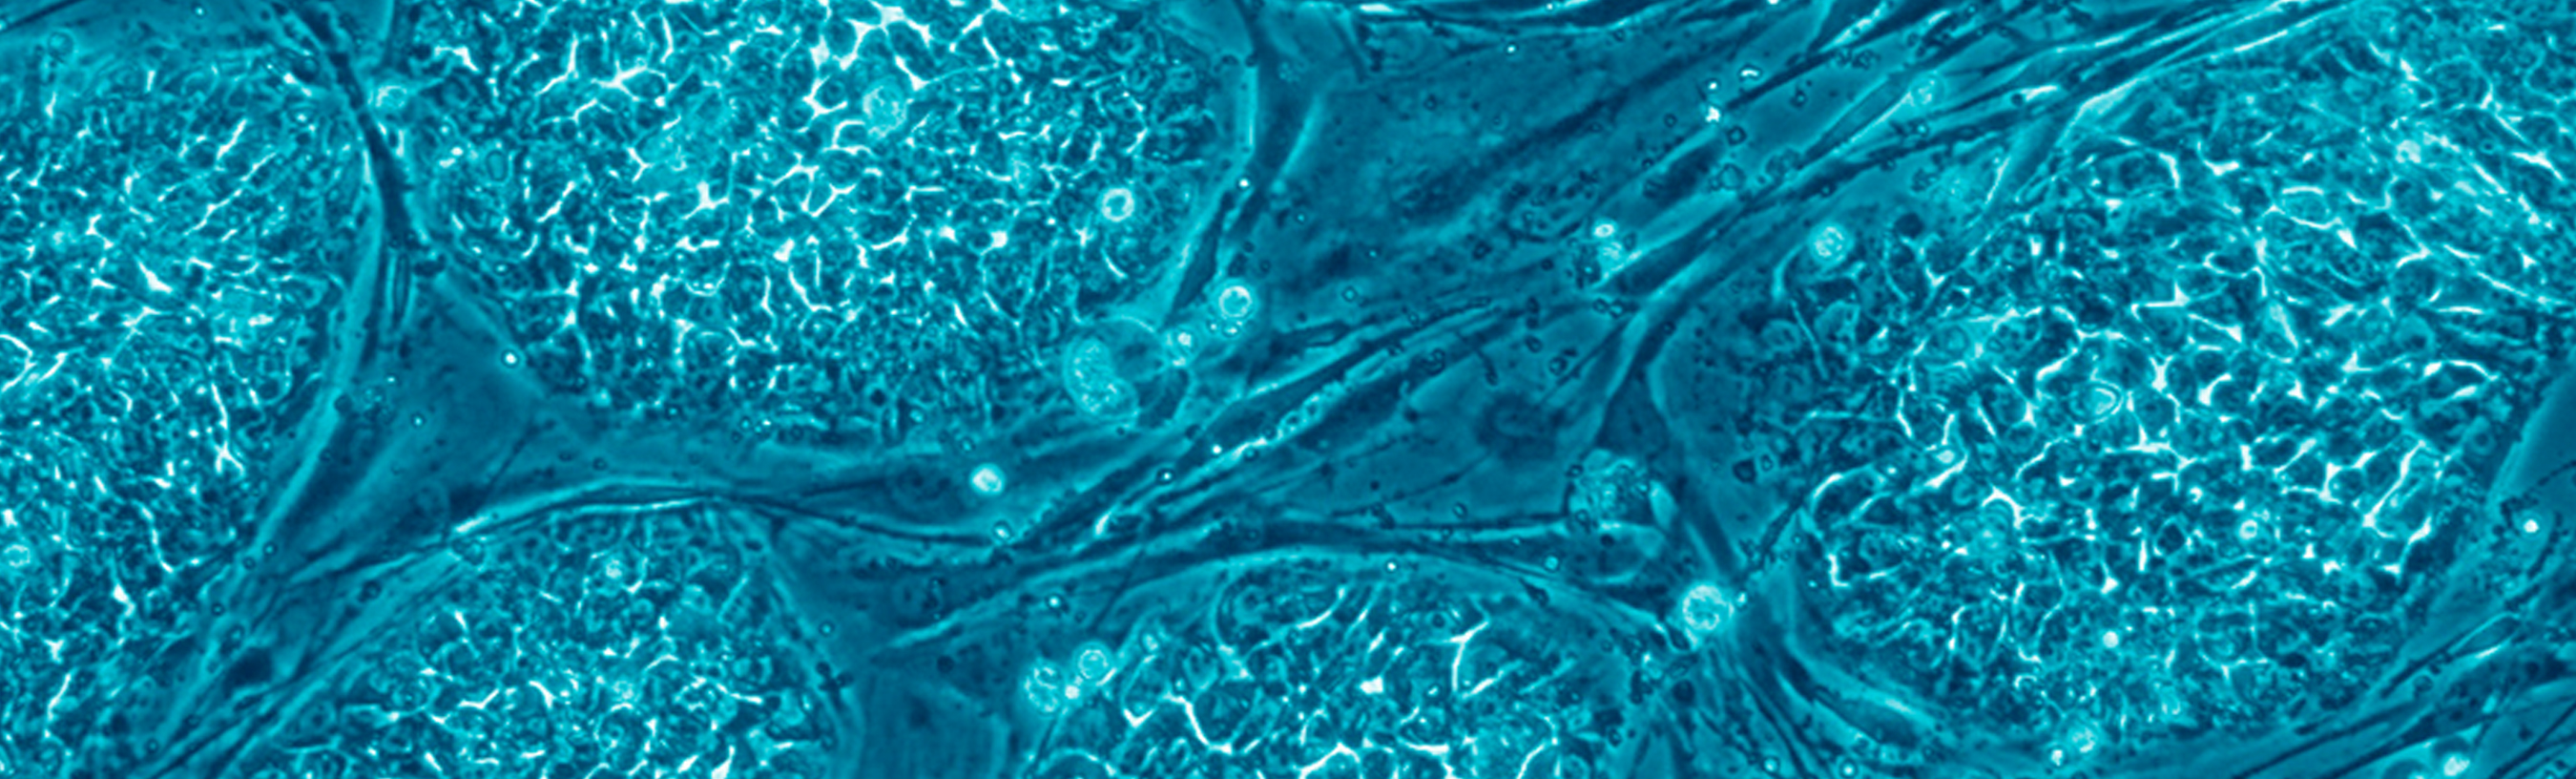 Embryonic stem cells grow as round colonies on top of a layer of long fibroblast supporting cells.